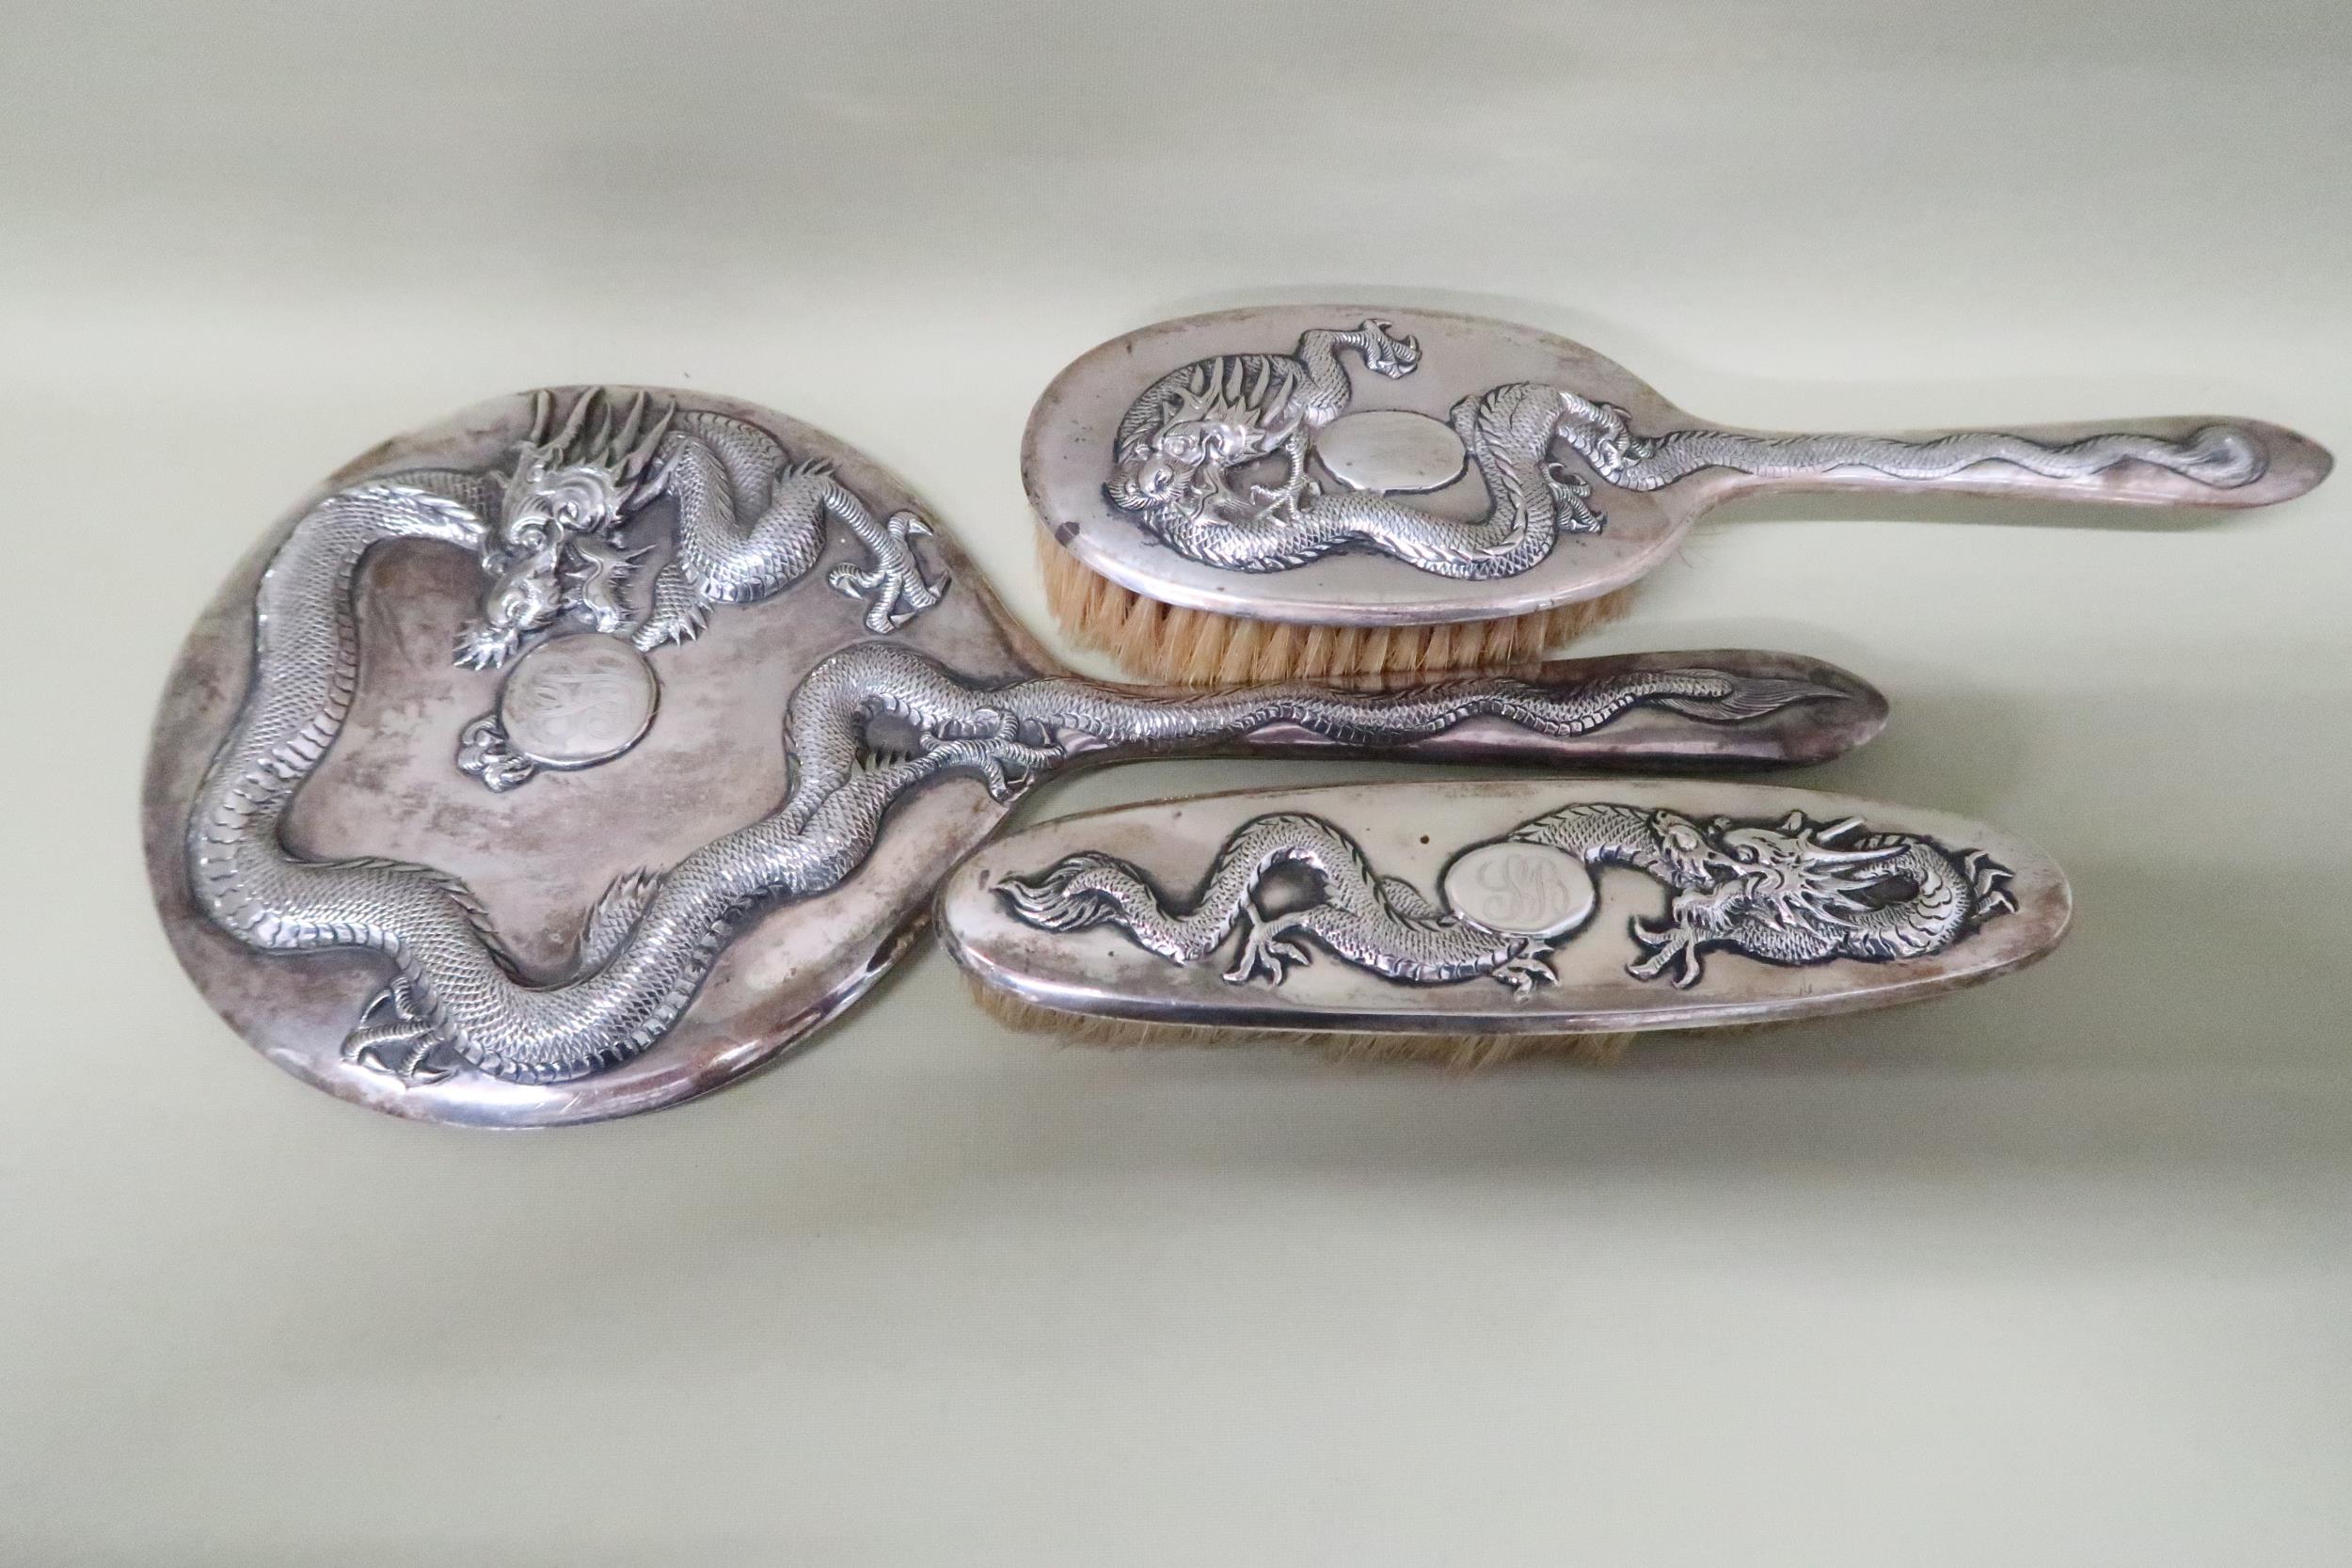 A hand mirror, hairbrush, clothes brush - all in Chinese silver decorated with dragons